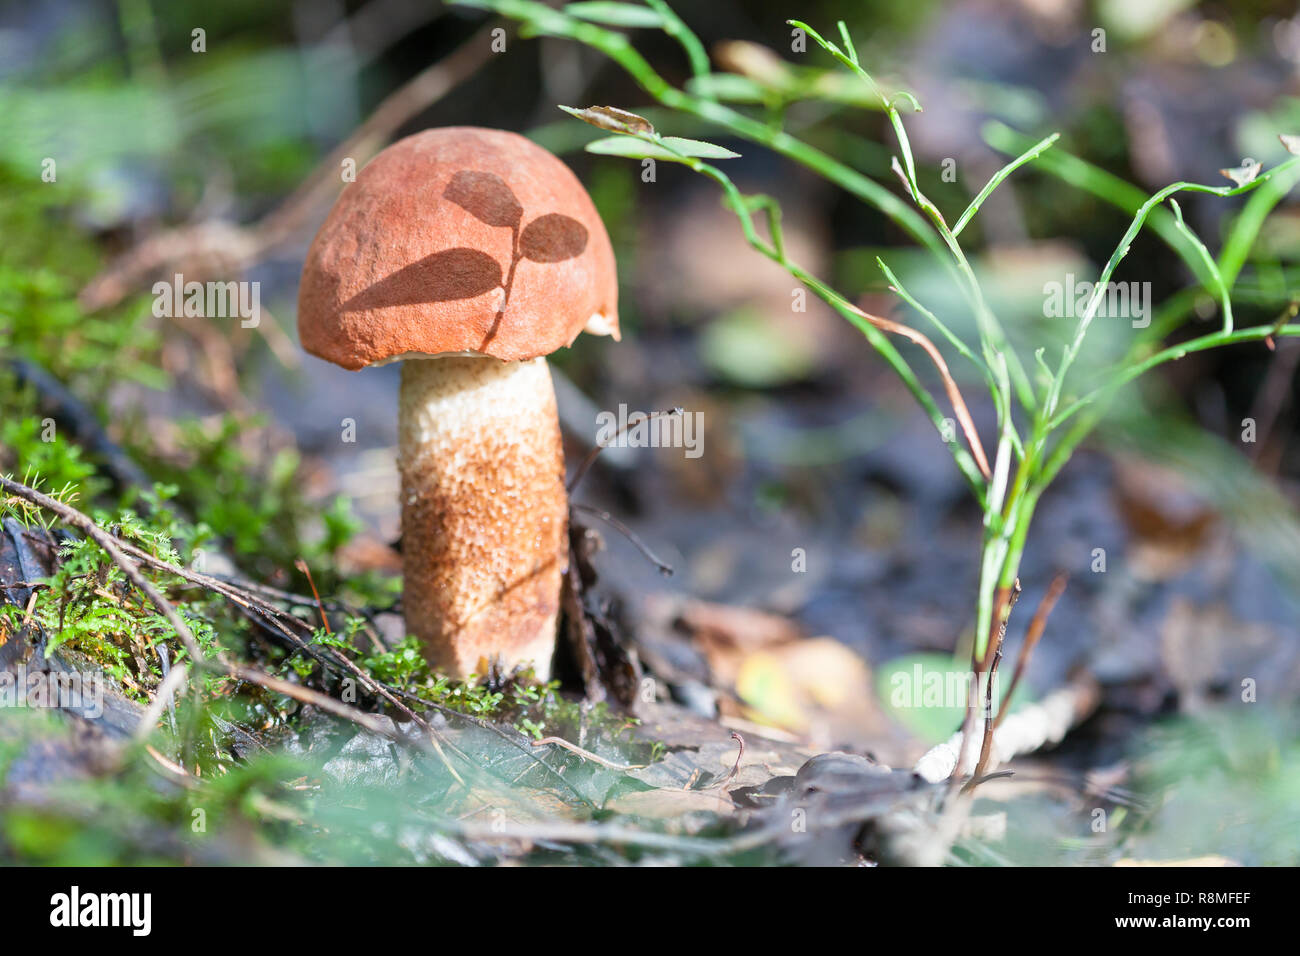 Little red-capped scaber stalk Leccinum aurantiacum with the shadow of a sprig of blueberries Stock Photo